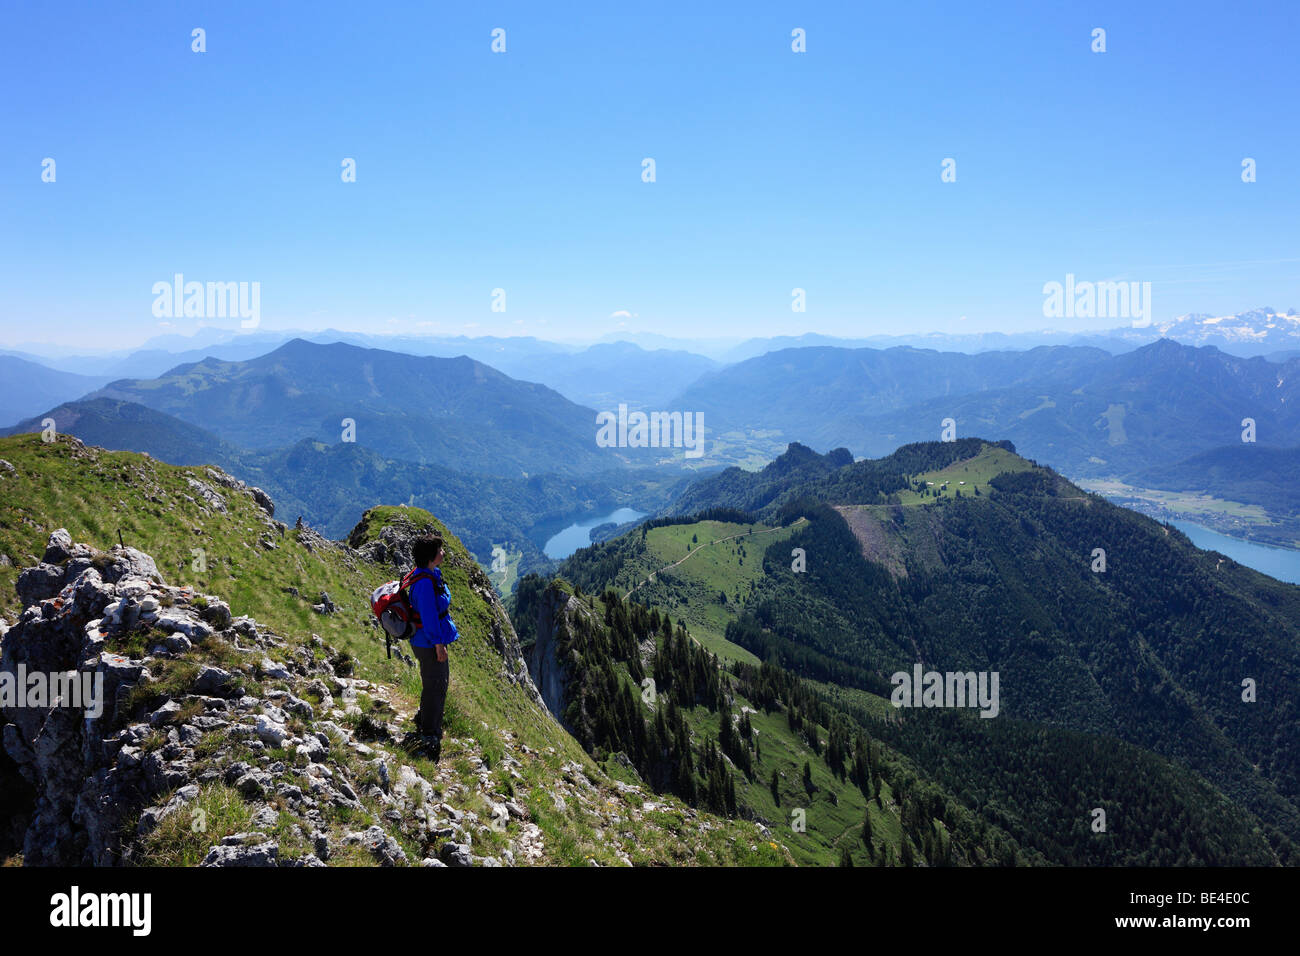 Woman with a backpack on Mt. Schafberg, Schwarzensee lake in the middle, on the right Wolfgangsee lake, Salzkammergut region, S Stock Photo